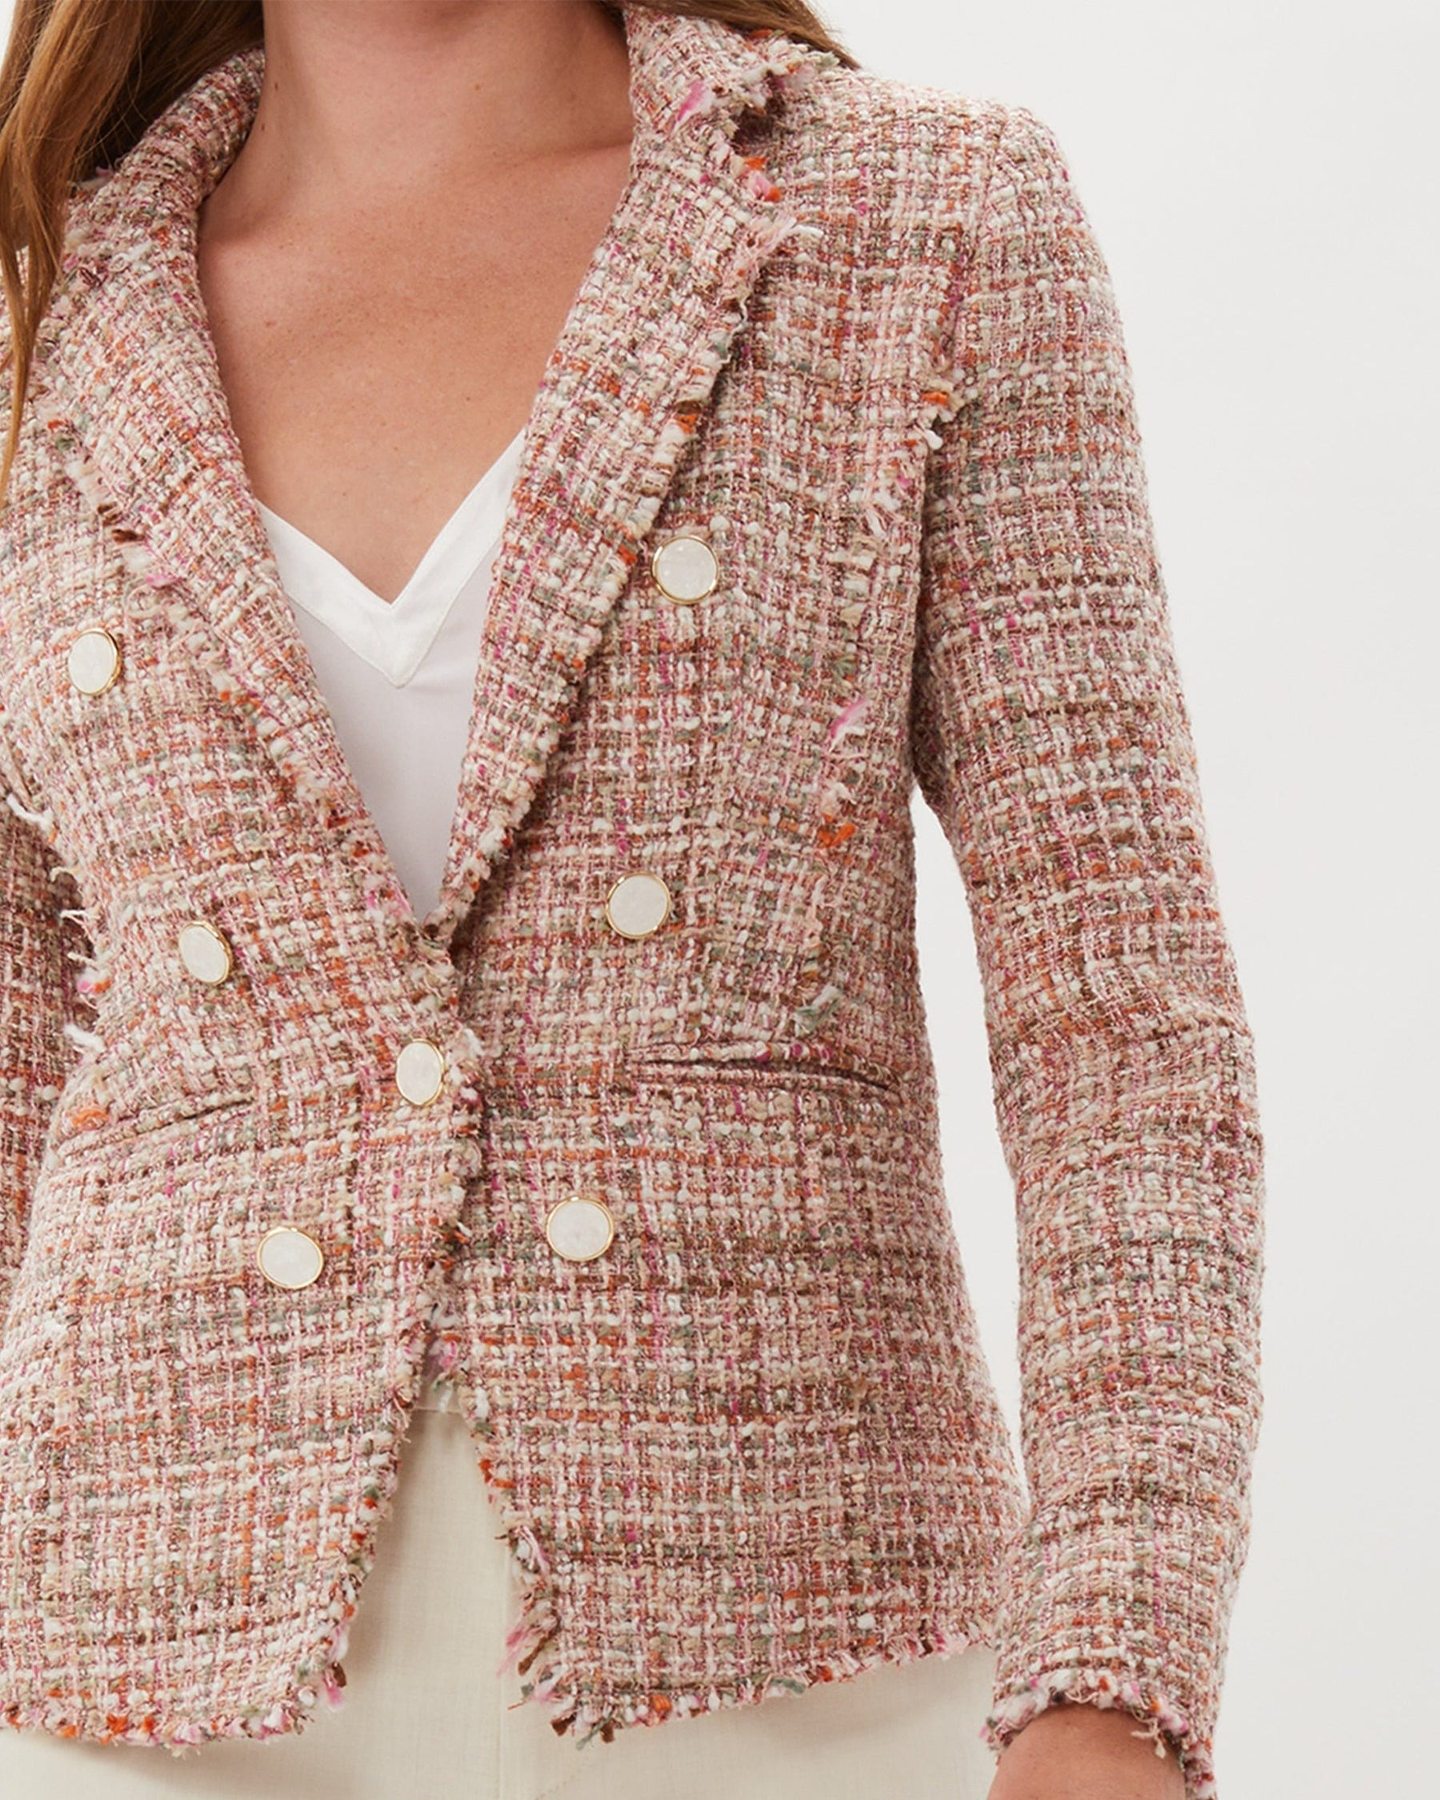 TWILL BLAZER WITH DOUBLE BREASTED LOOK - MULTI